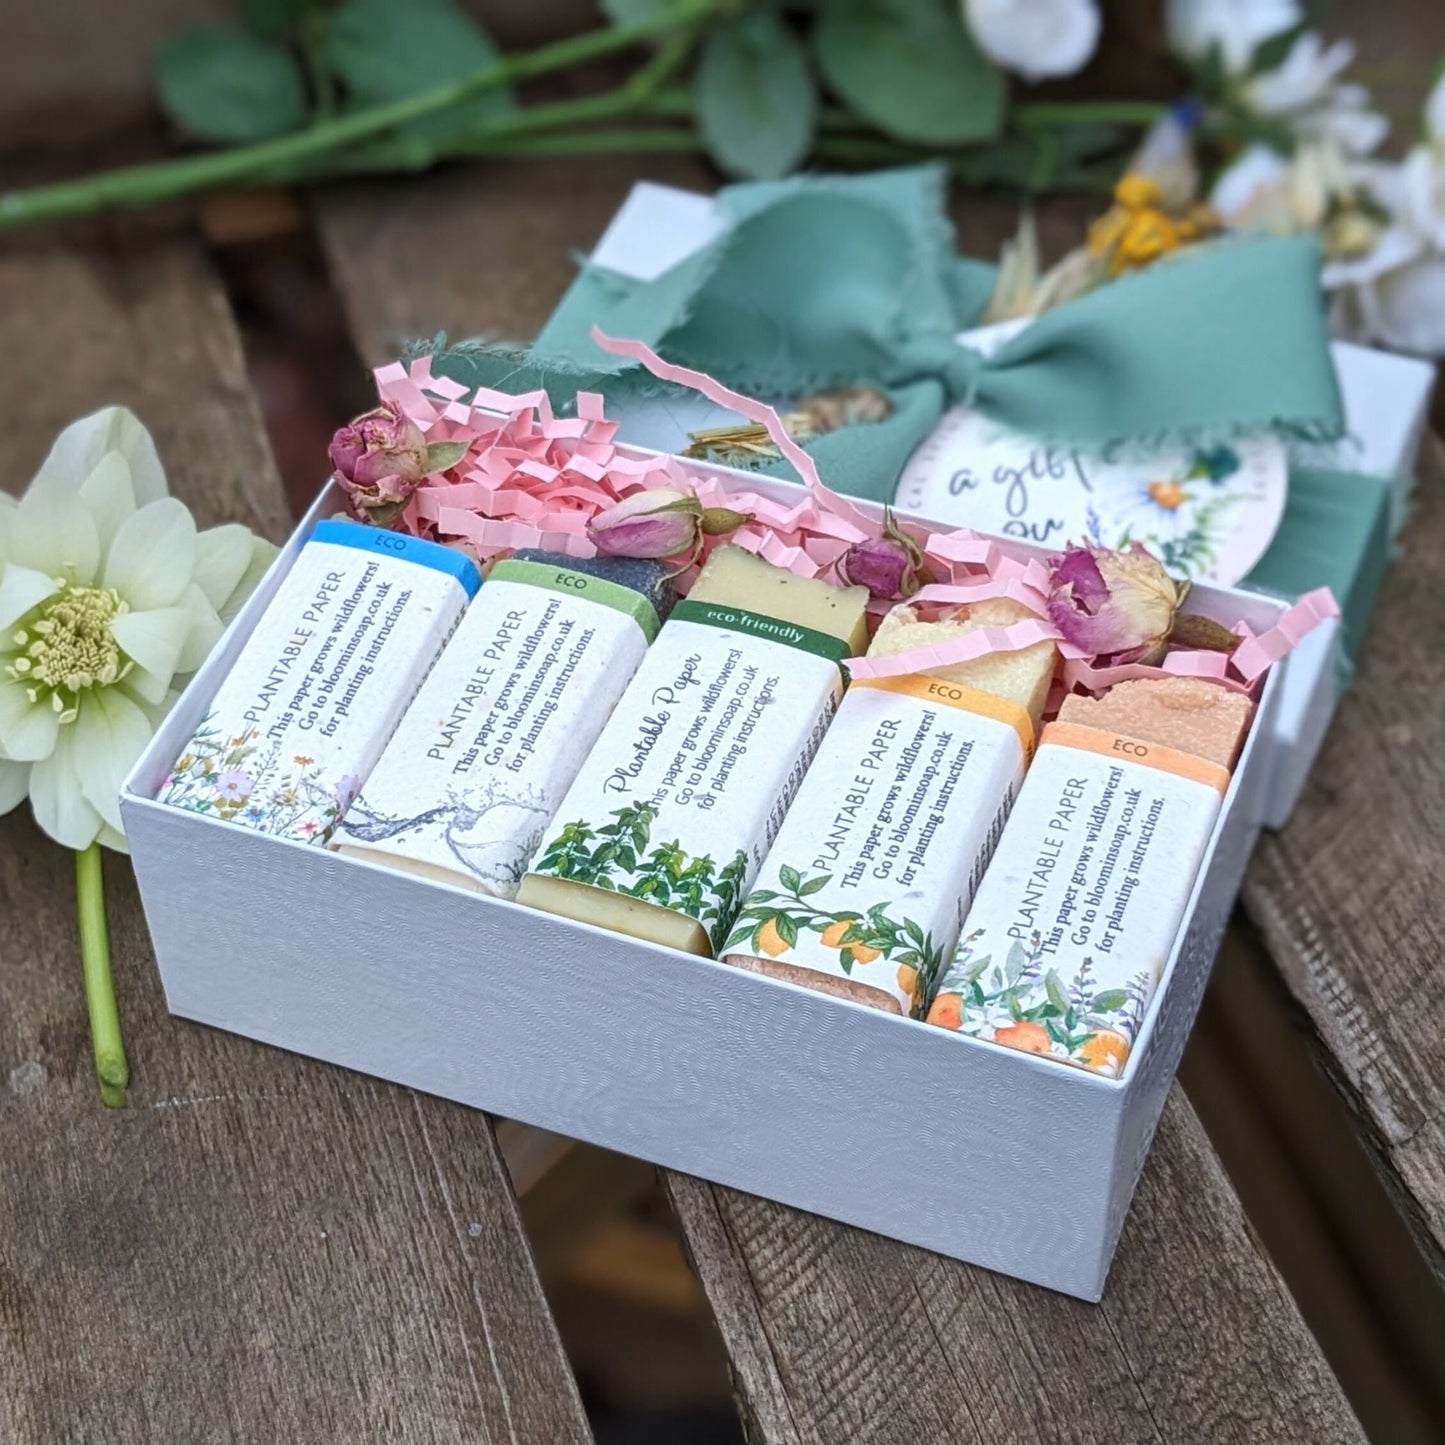 Soap Lover's Gift Box with handmade soaps